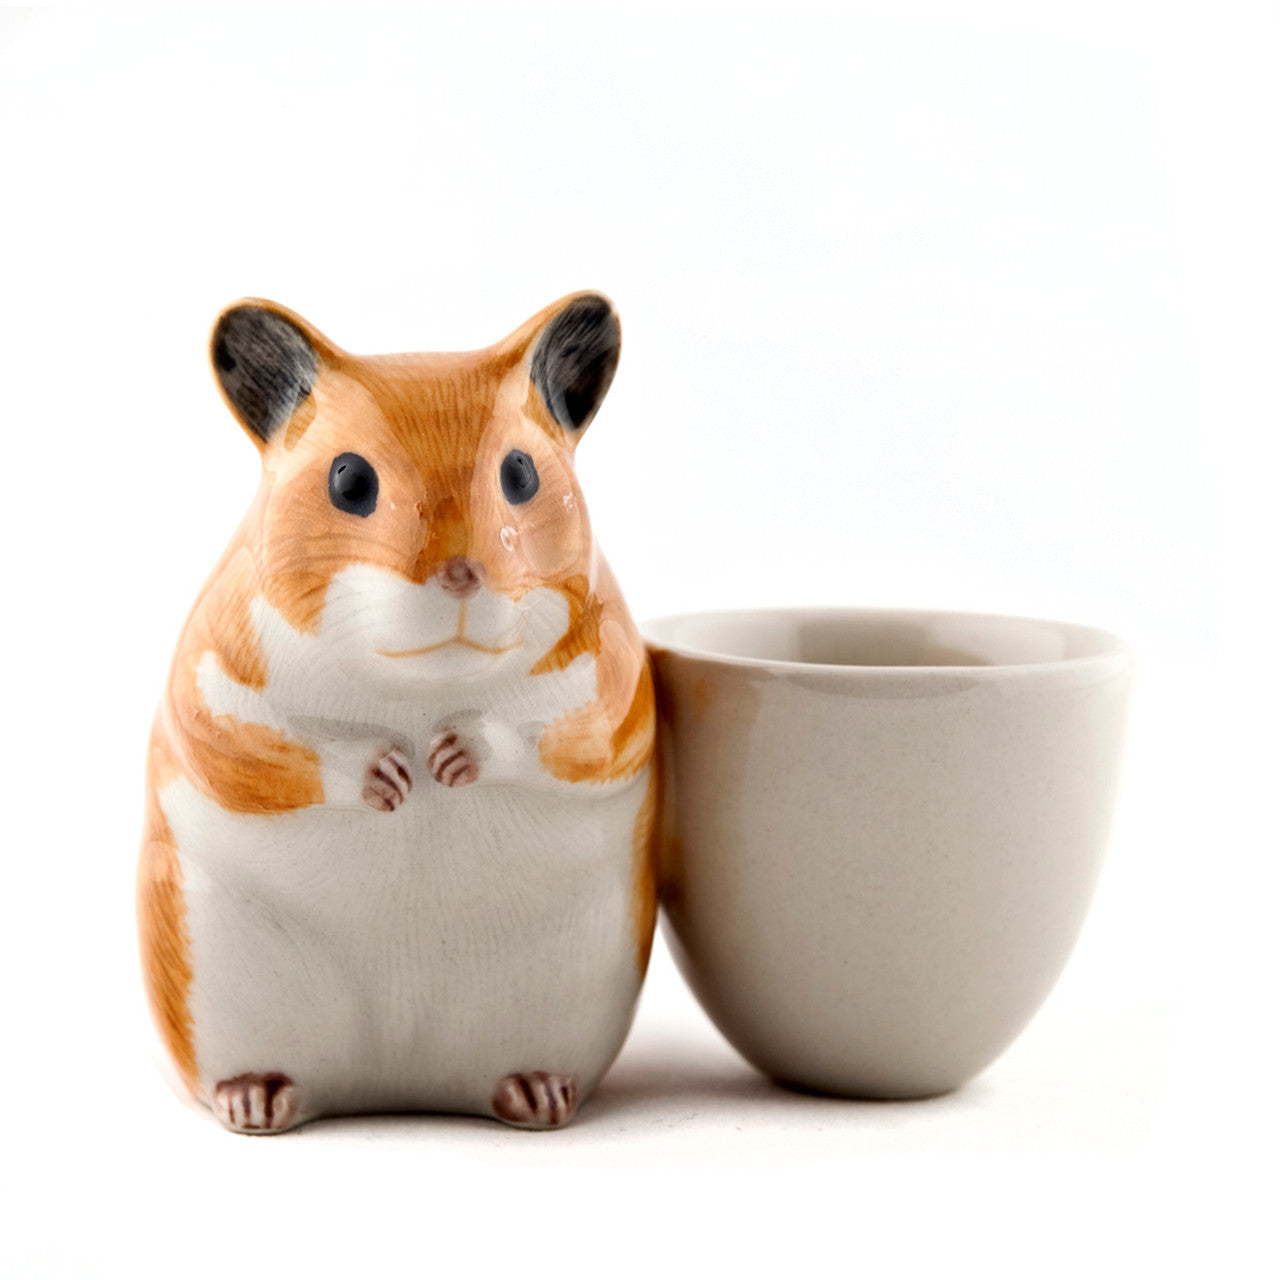 Hamster Egg Cup